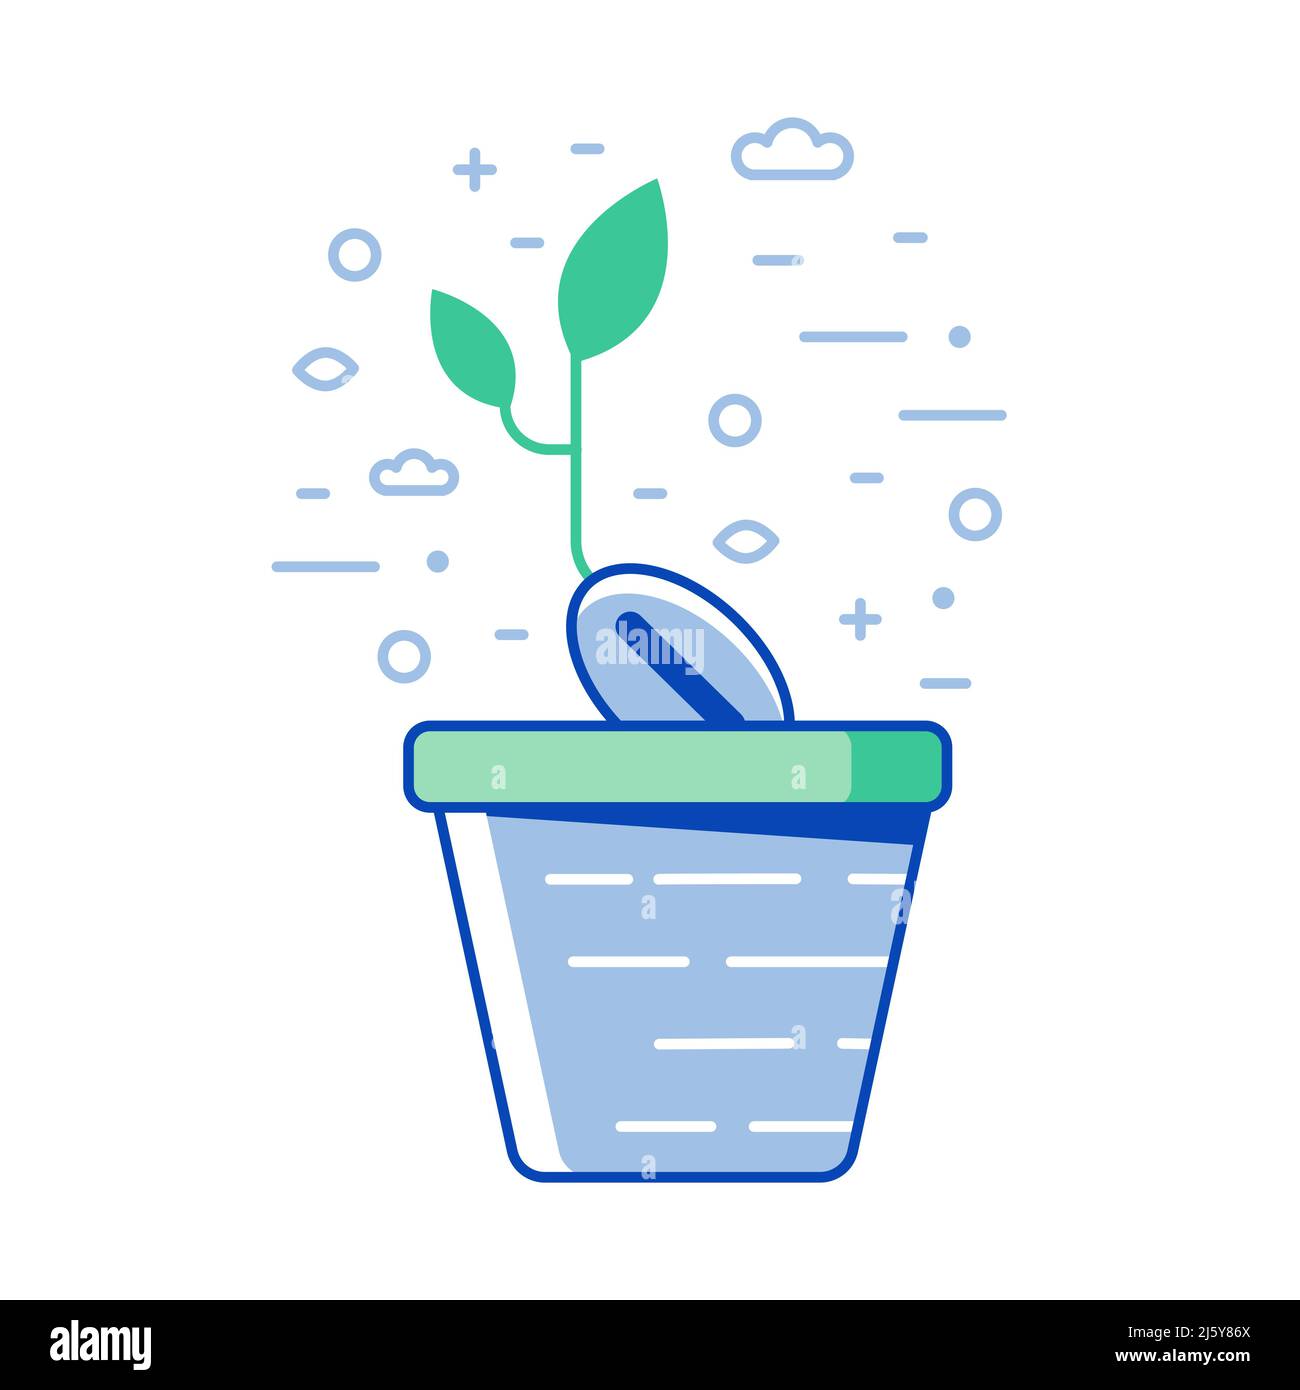 Growing Sprout with Leaves Line Art Icon Stock Vector